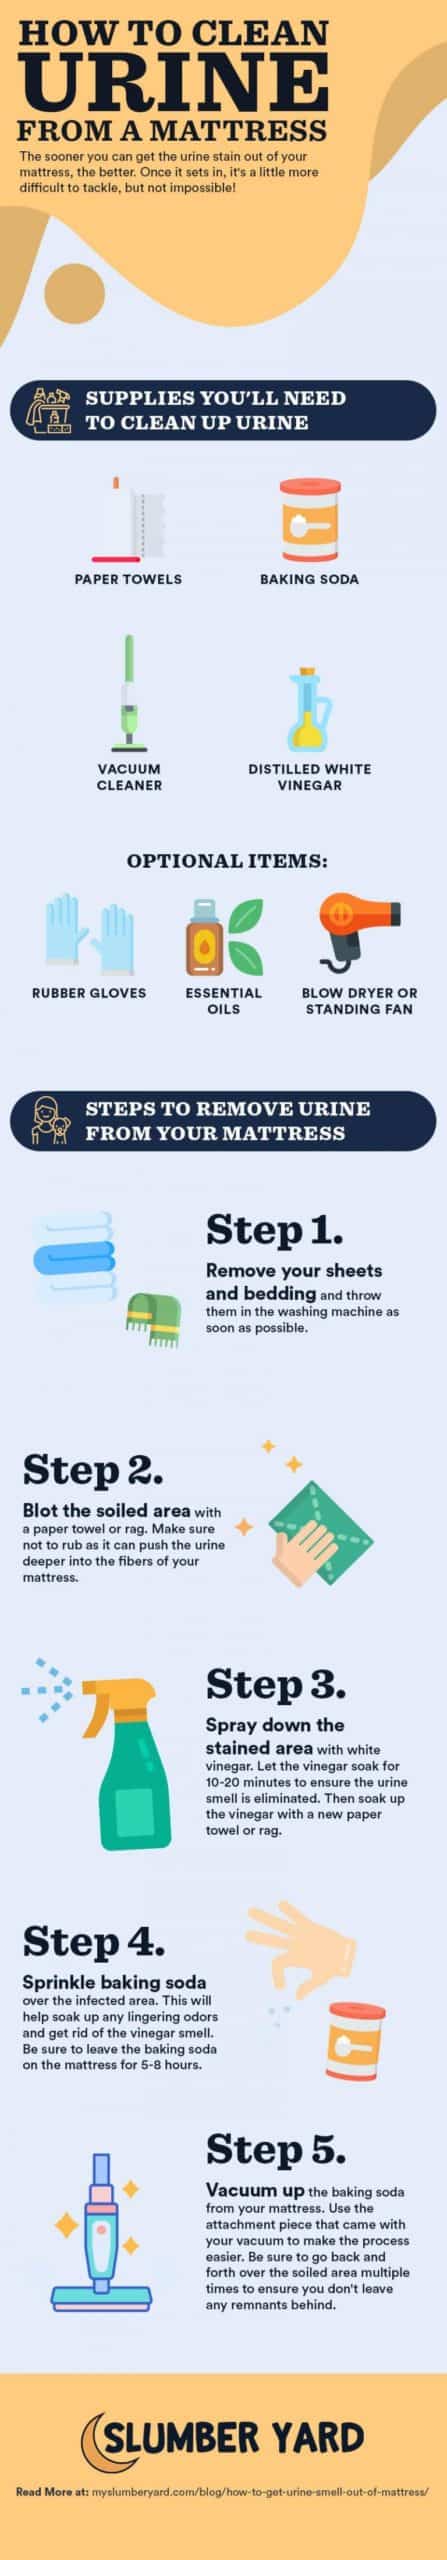 How to clean urine from a mattress